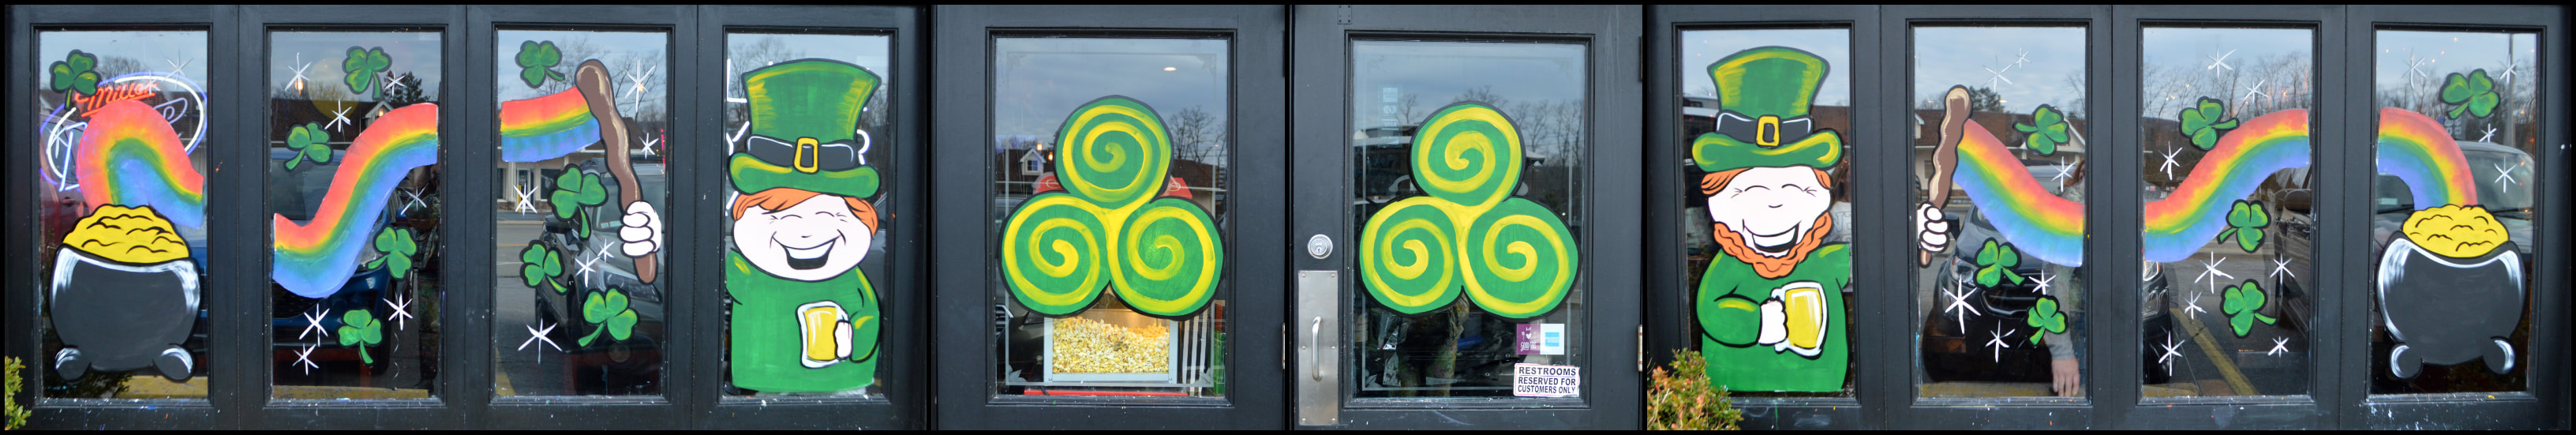 St. Patrick's Day Window Painting at The Copper Still in Pomona, Rockland County, NY